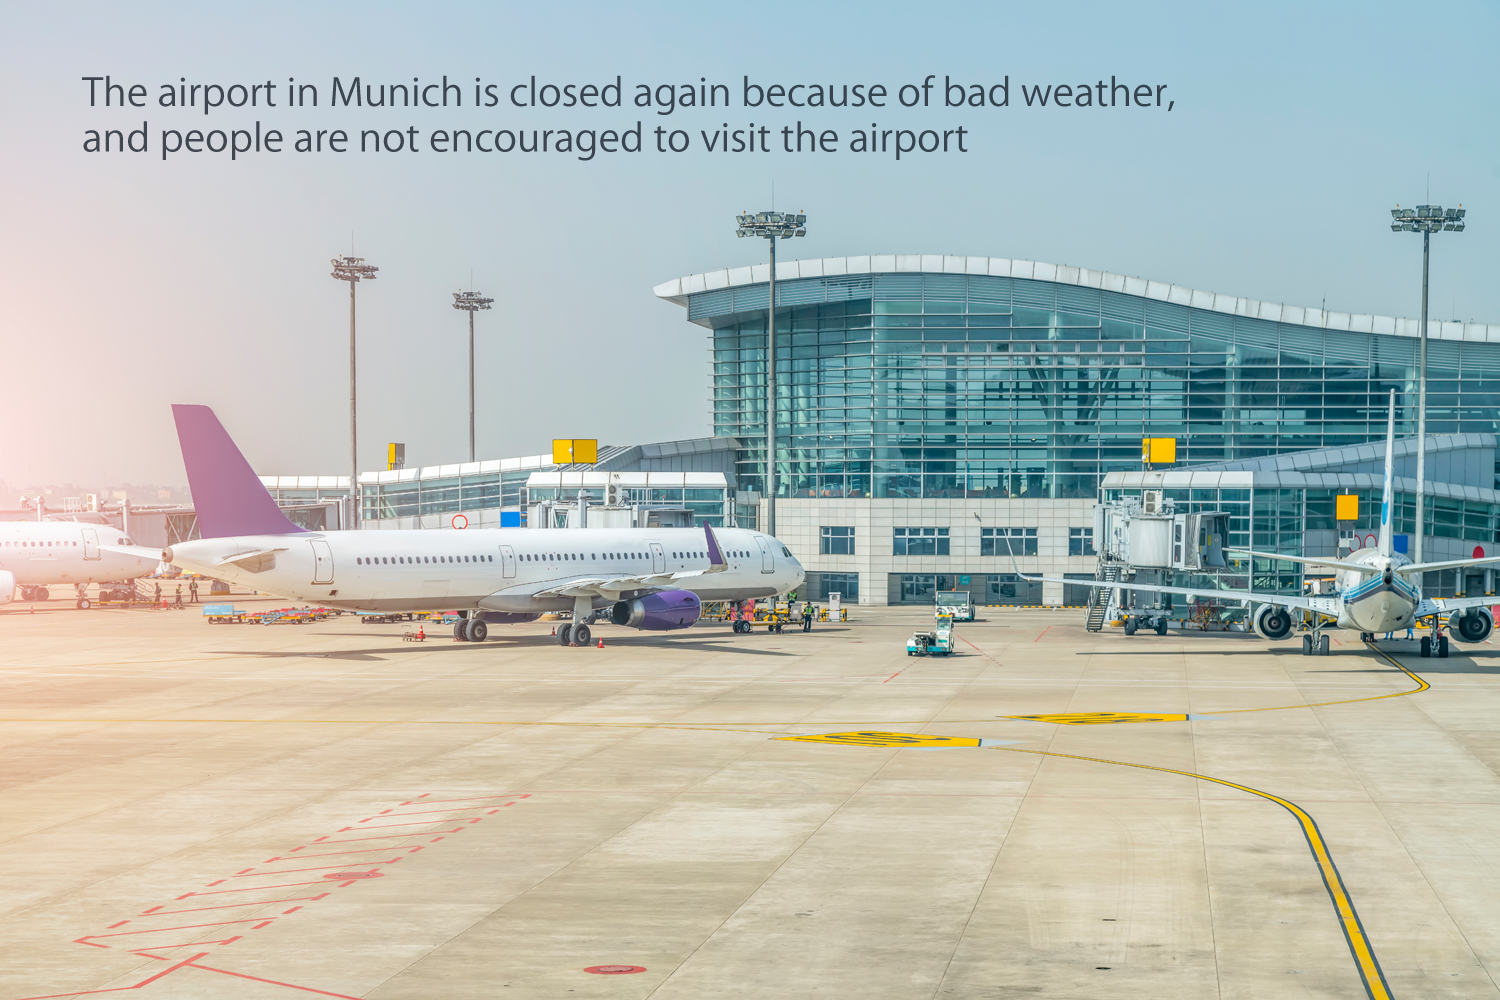 The airport in Munich is closed again because of bad weather, and people are not encouraged to visit the airport